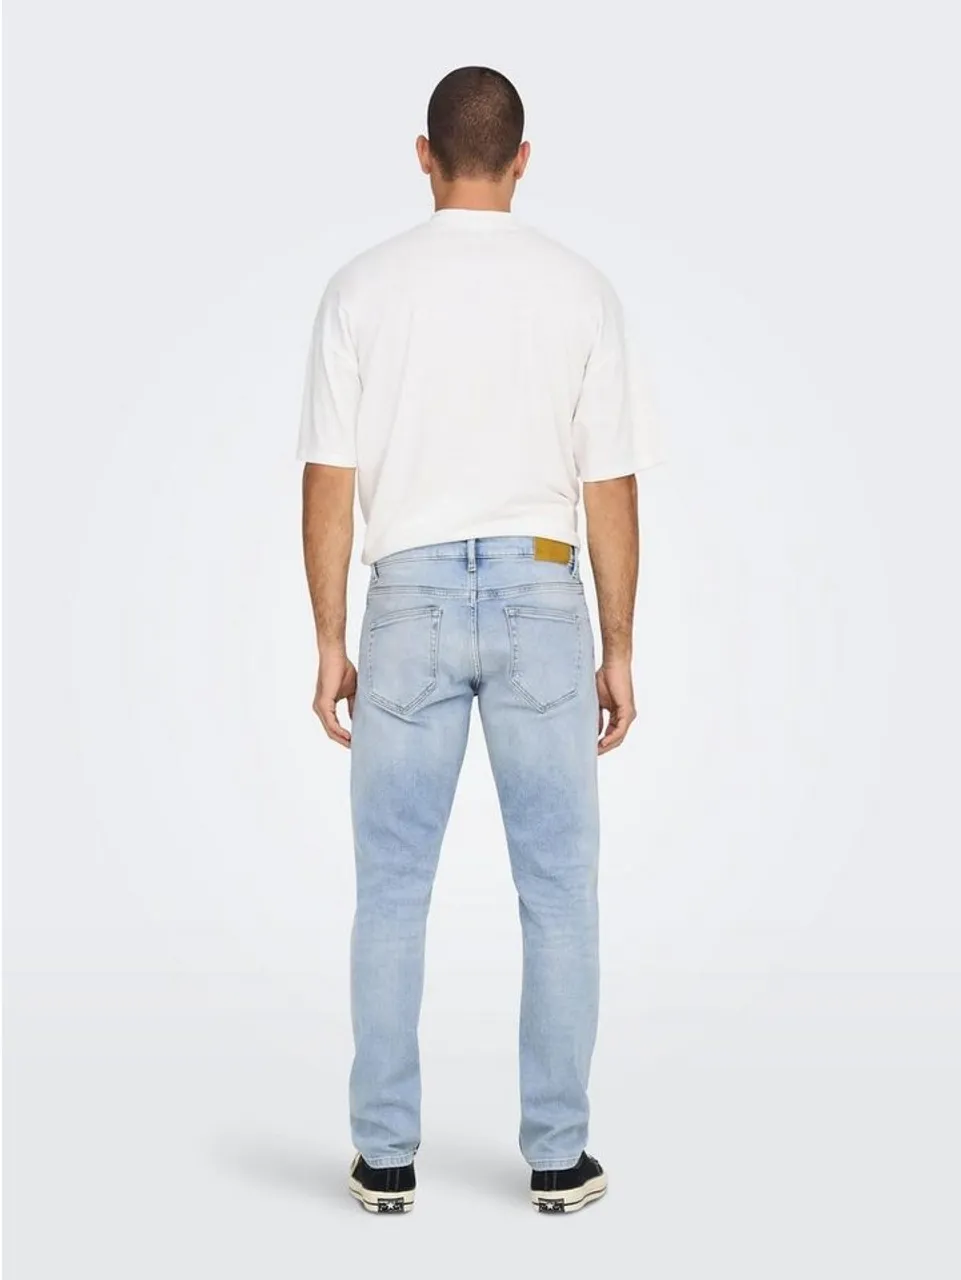 ONLY & SONS Slim-fit-Jeans Slim Fit Jeans Denim Hose Pants Stone Wash Trousers ONSWEFT 4786 in Blau